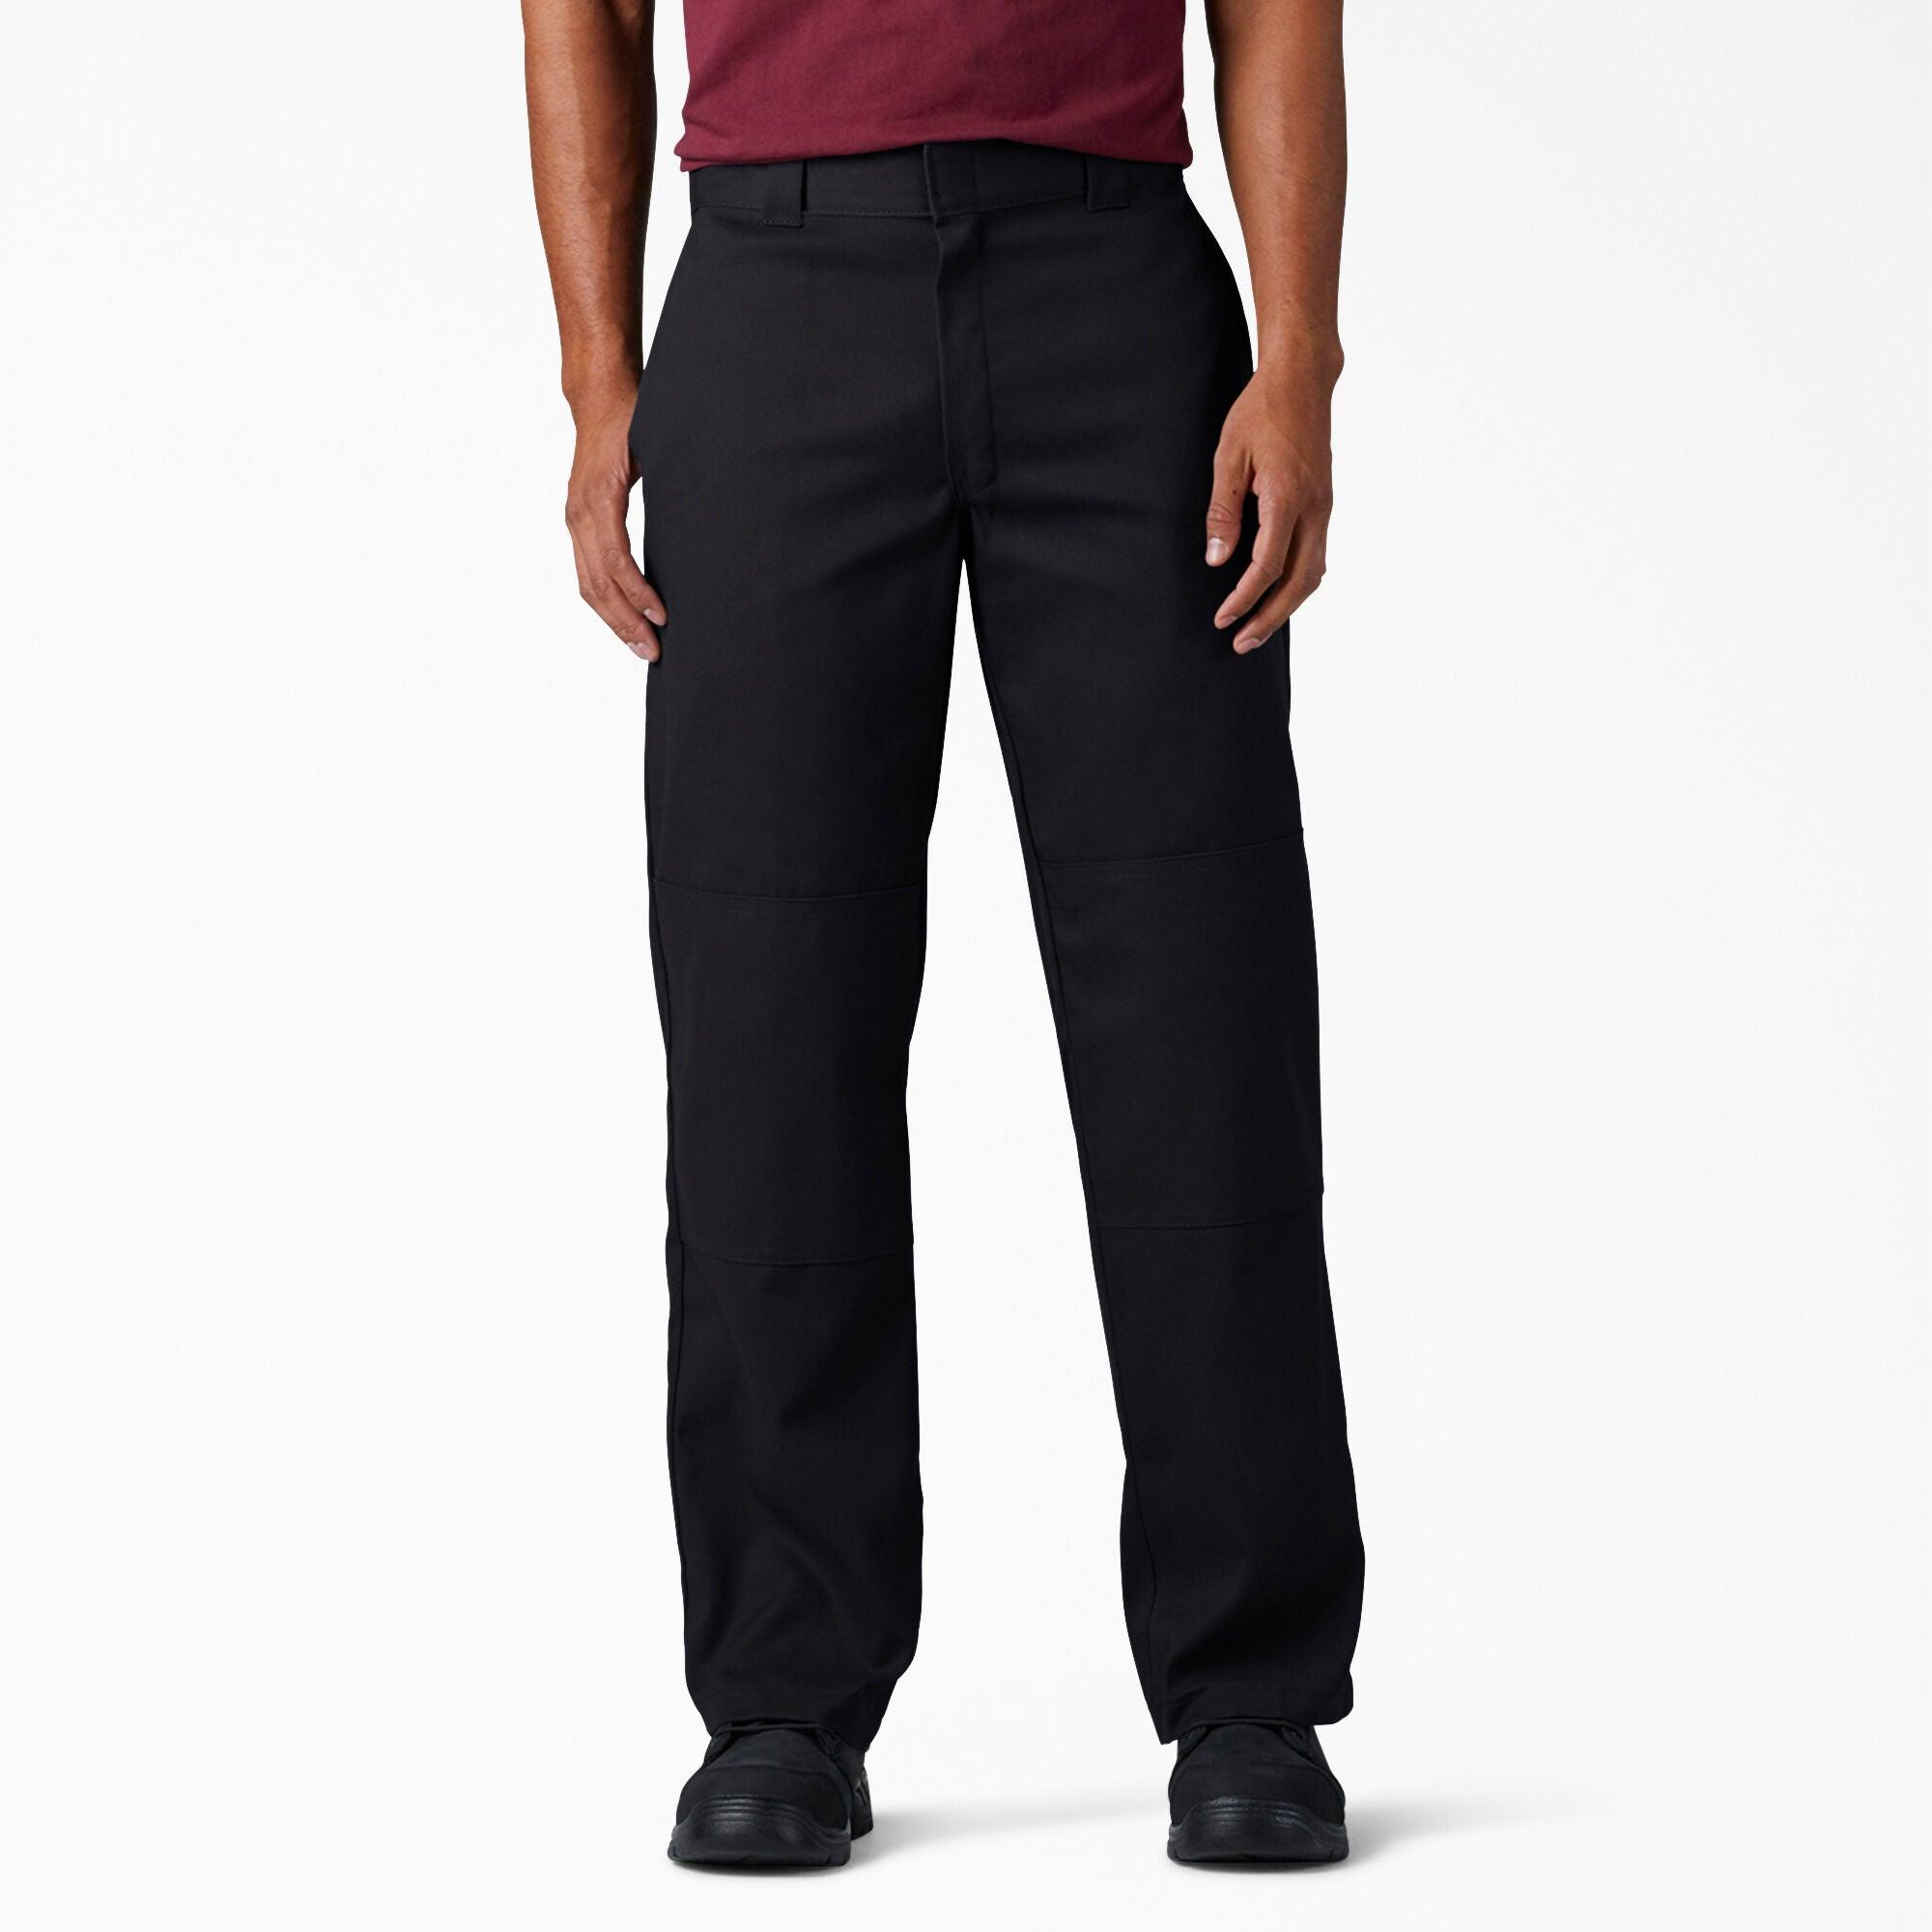 FLEX Loose Fit Double Knee Work Pants, Black - Purpose-Built / Home of the Trades